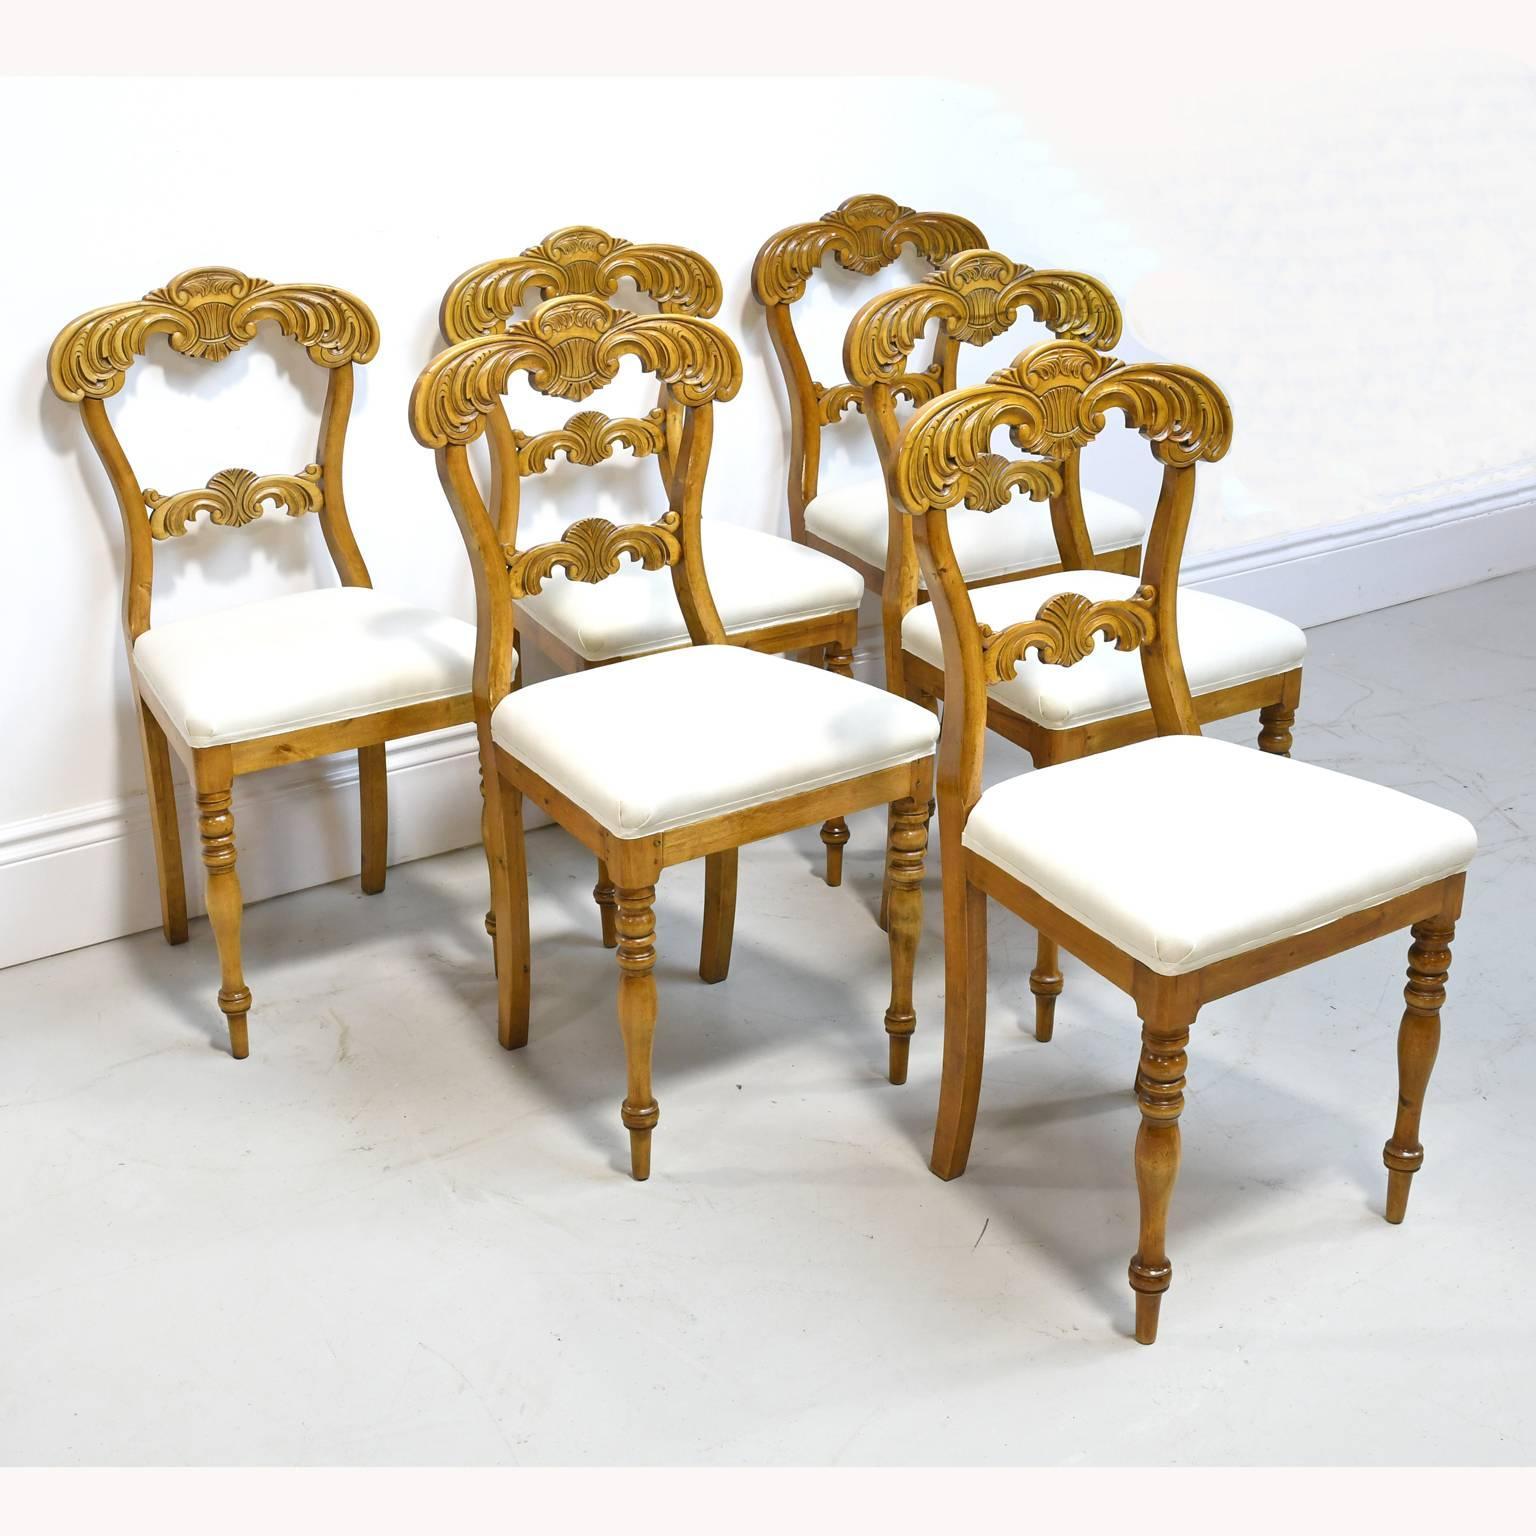 From the reign of the French-born Swedish king, Karl Johan, a very lovely set of six dining chairs in birch with foliate carvings on crest and bottom back rail, with turned front legs and saber back legs and upholstered seat, Sweden, circa